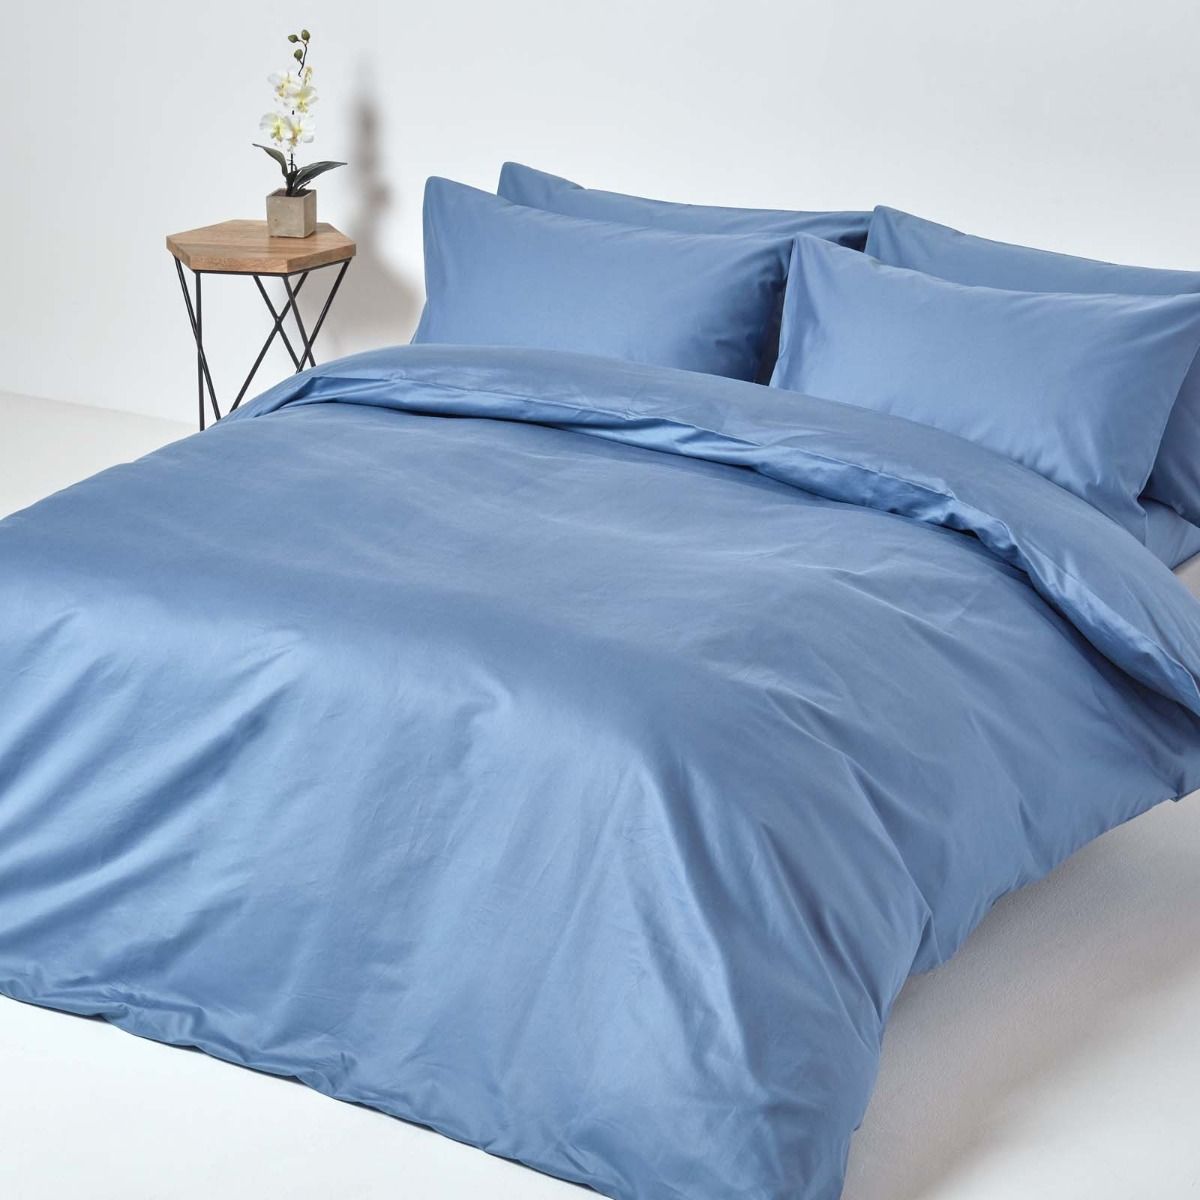 Bedding Collection Select Item 1000 TC Egyptian Cotton UK Sizes Sky Blue Solid 